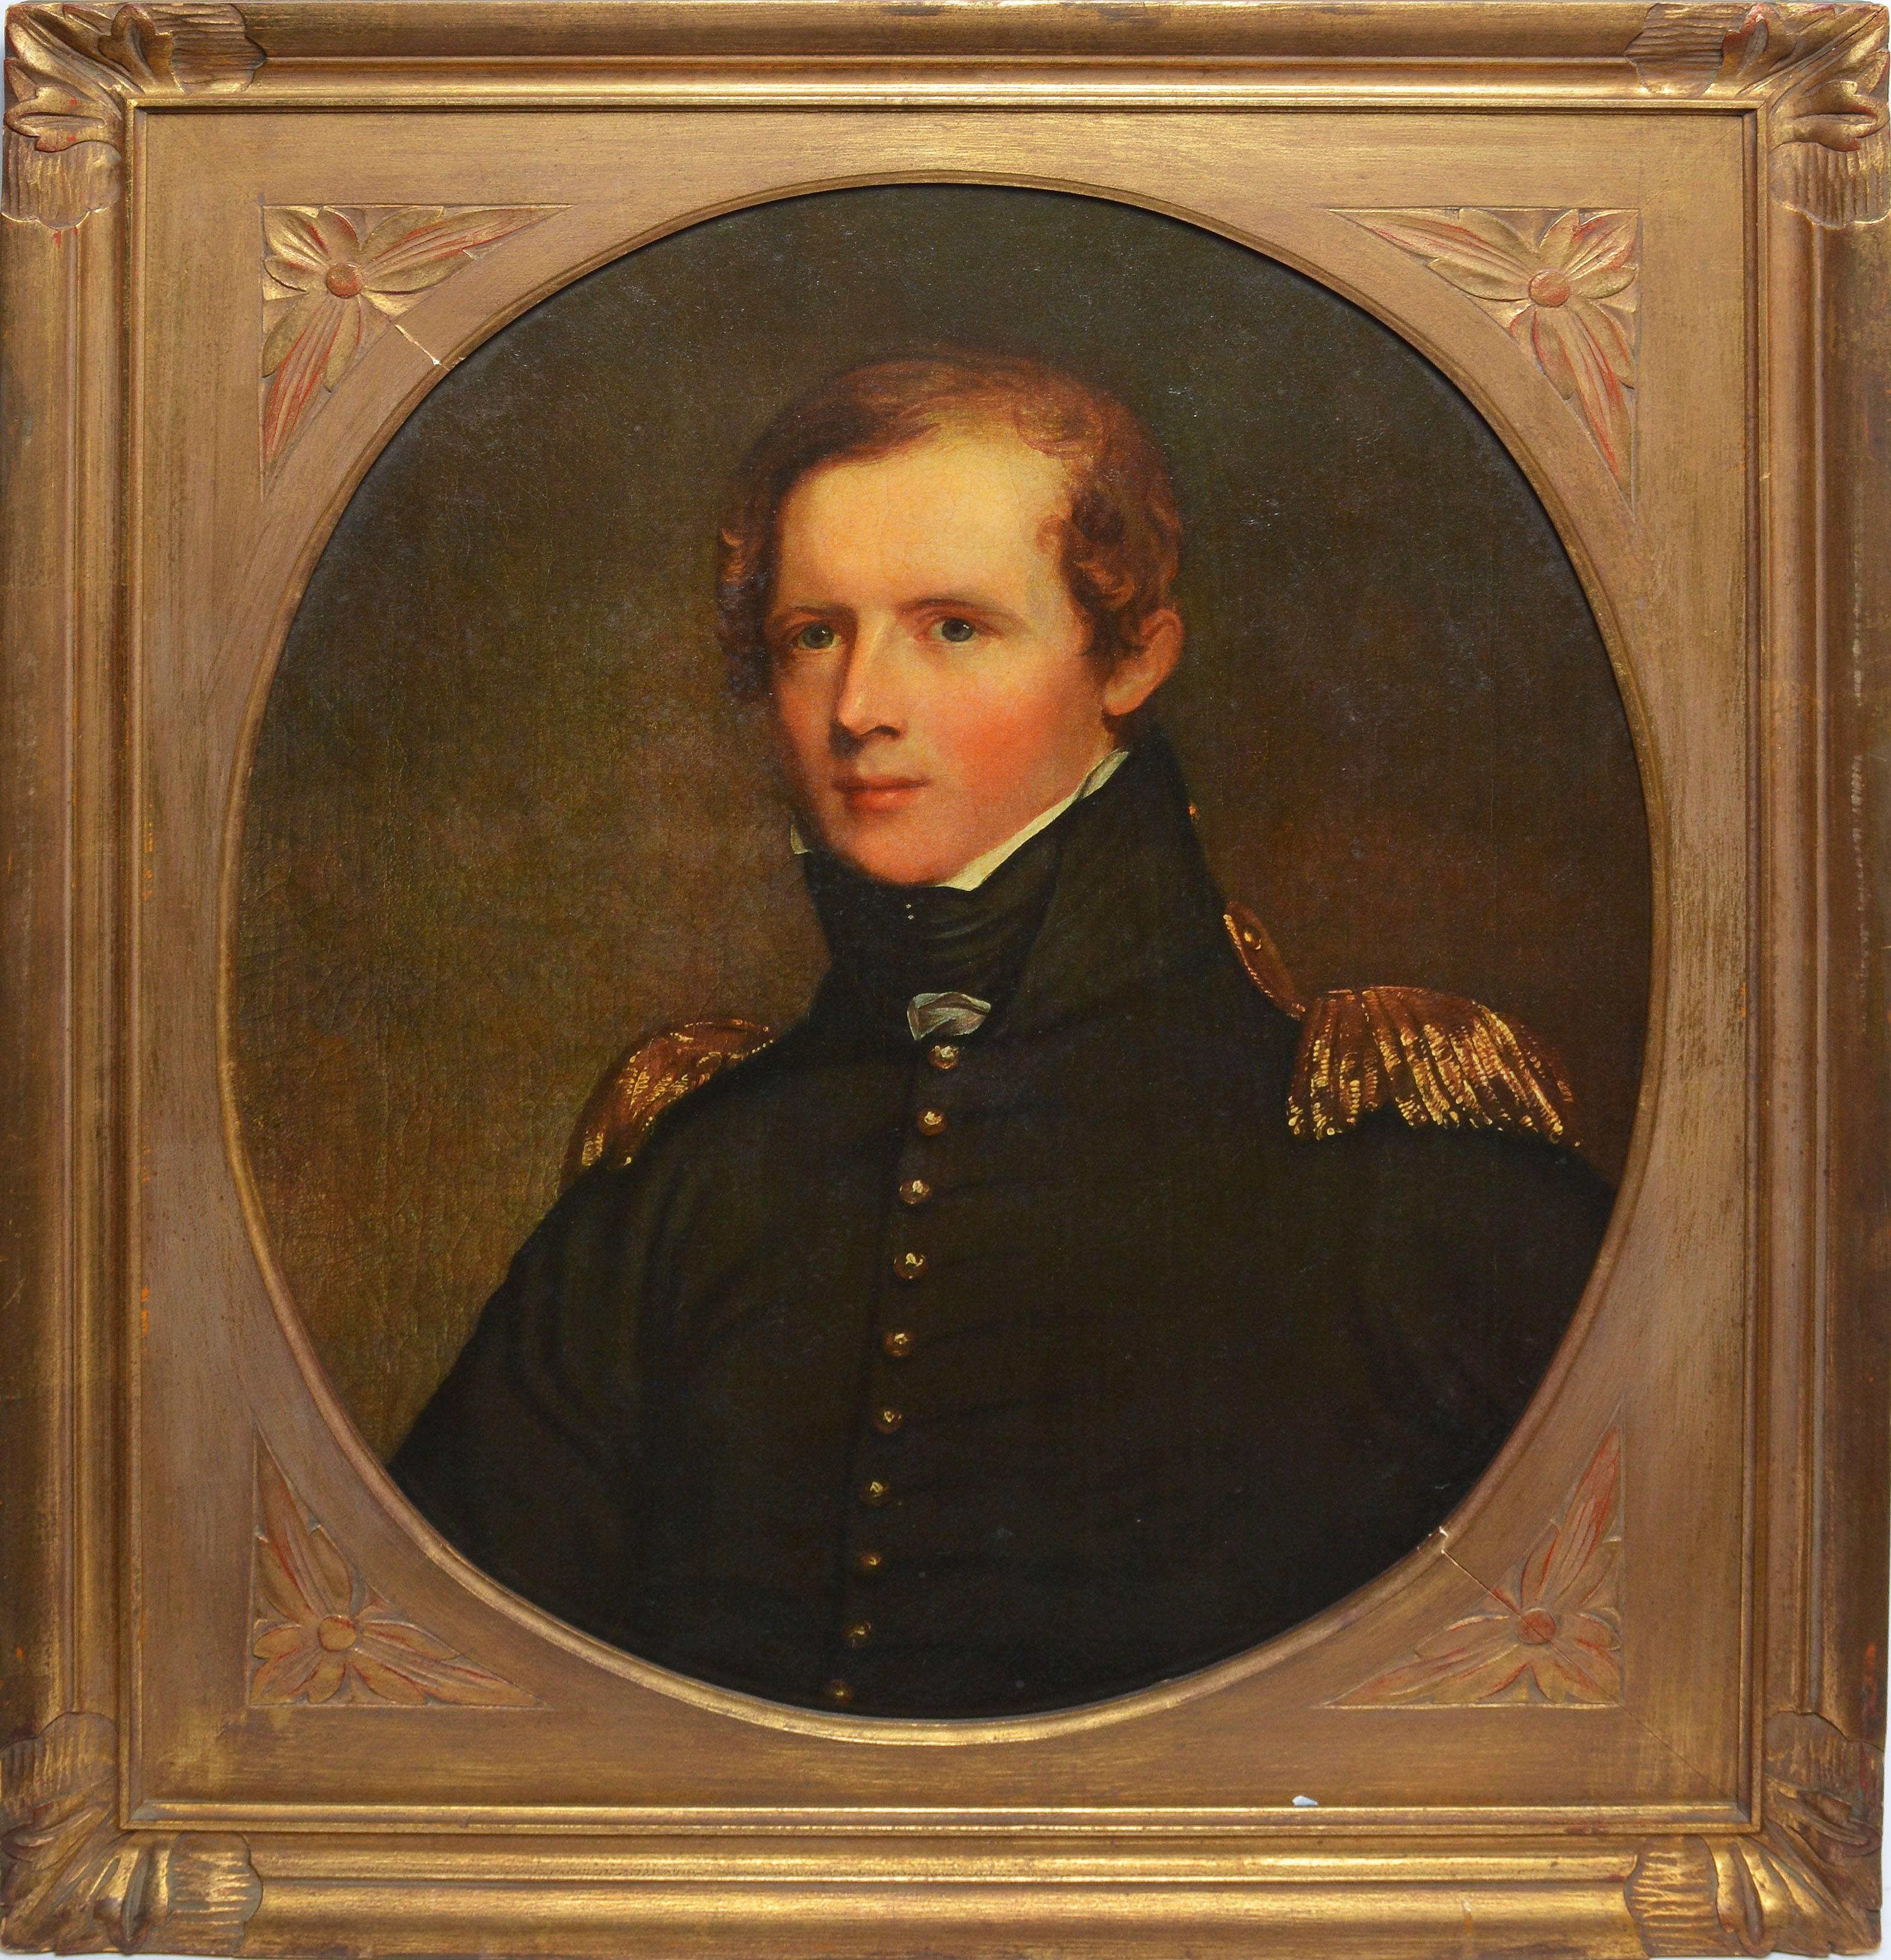 Unknown Portrait Painting - Portrait of a Young Military Officer